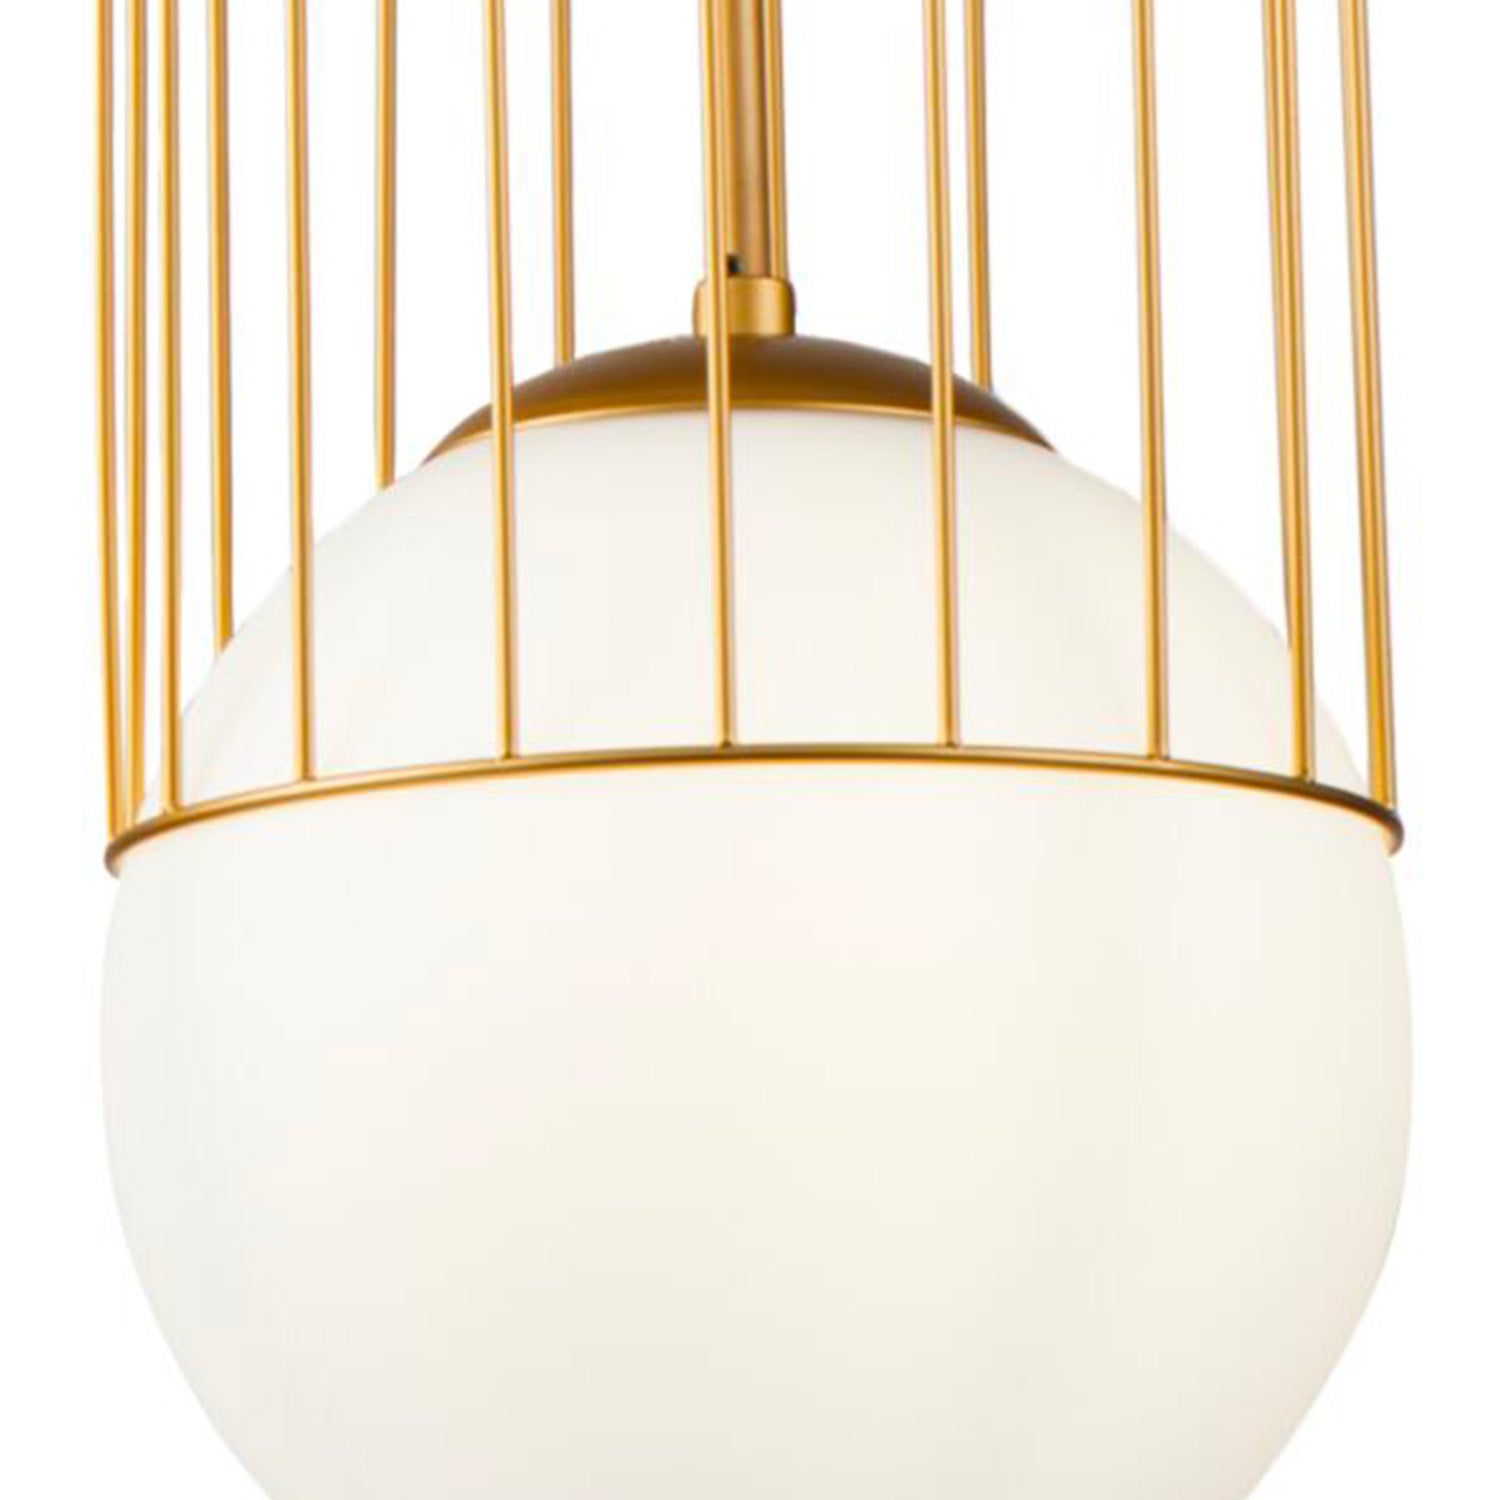 TELFORD - Gold Cage Pendant with White Glass Ball